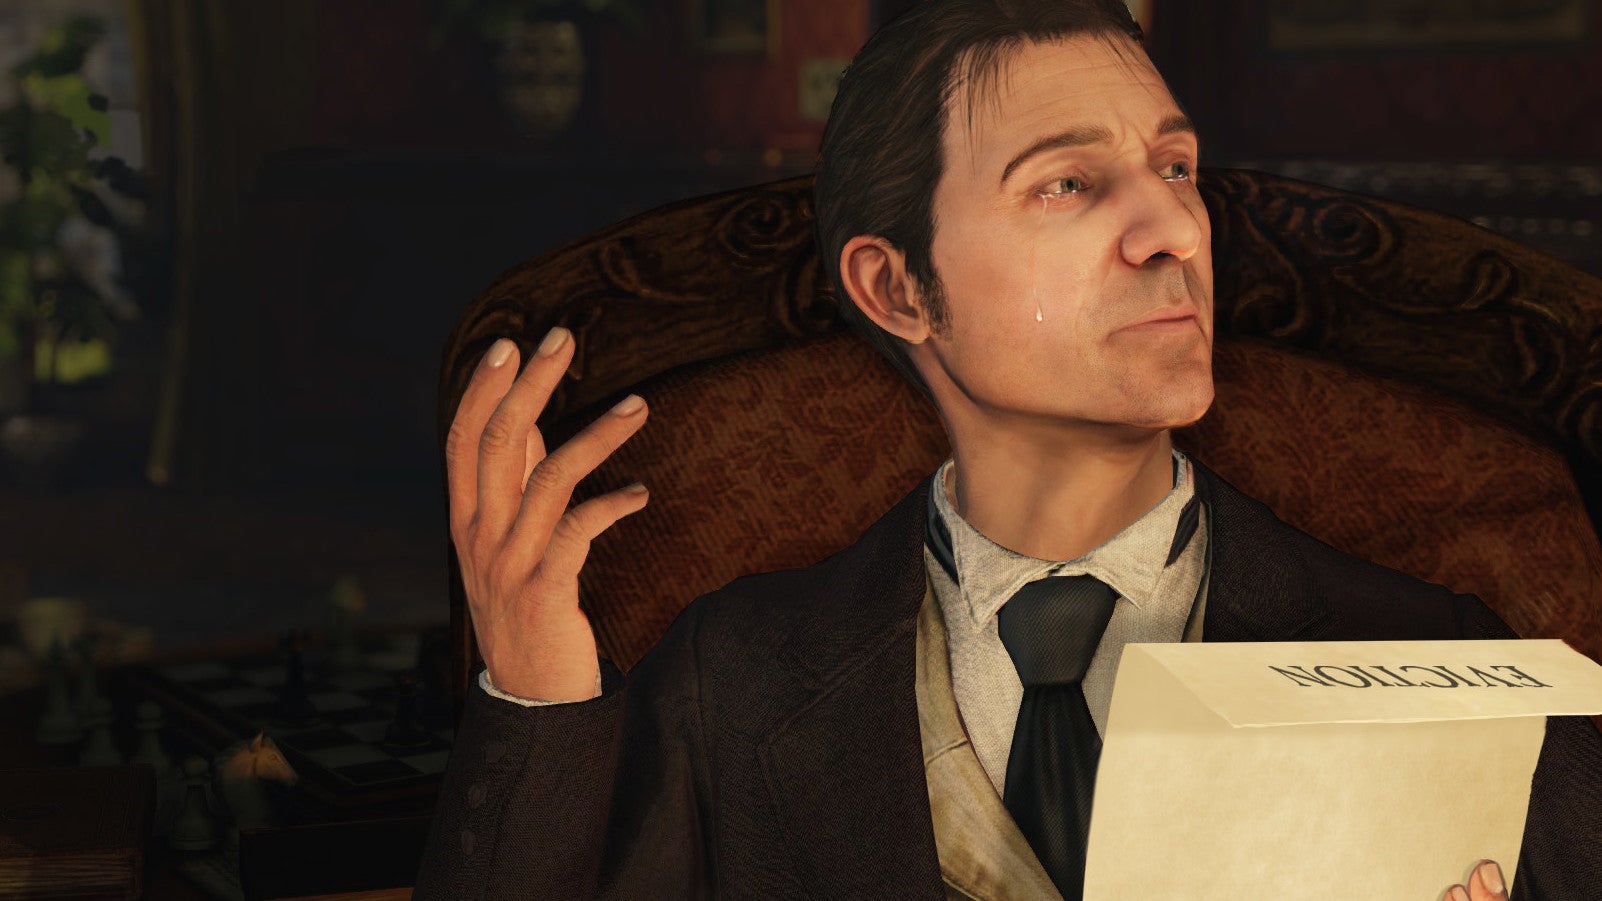 Sherlock Holmes Developers Accuse Publisher Of Delisting Their Games, Not Returning The Code